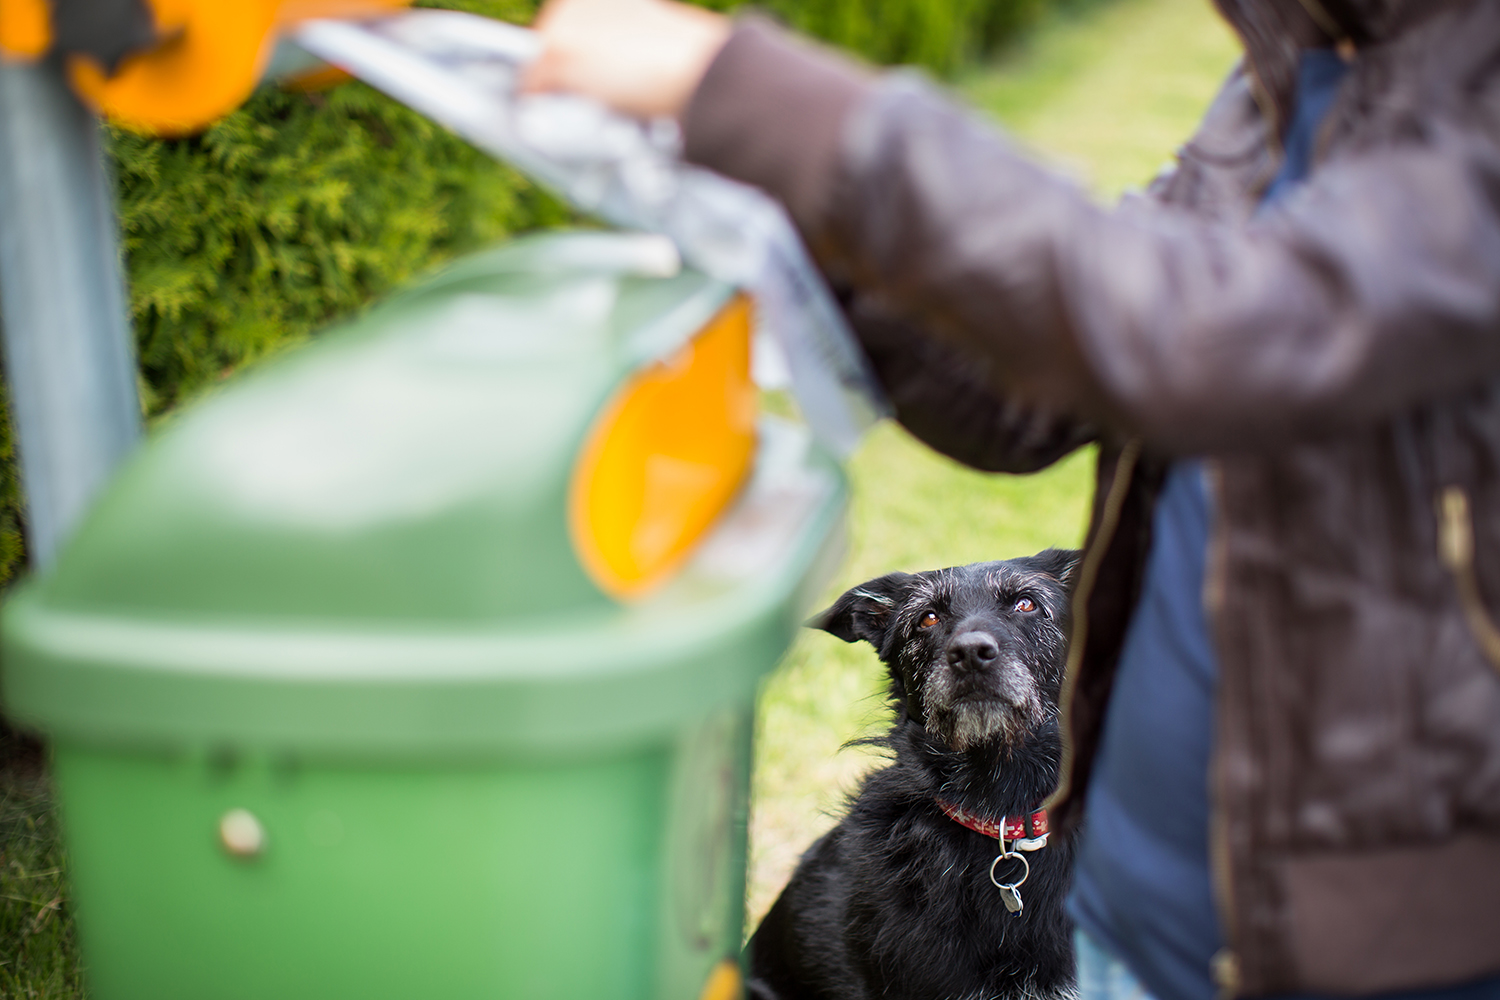 An image of a person putting bagged dog poo in the bin